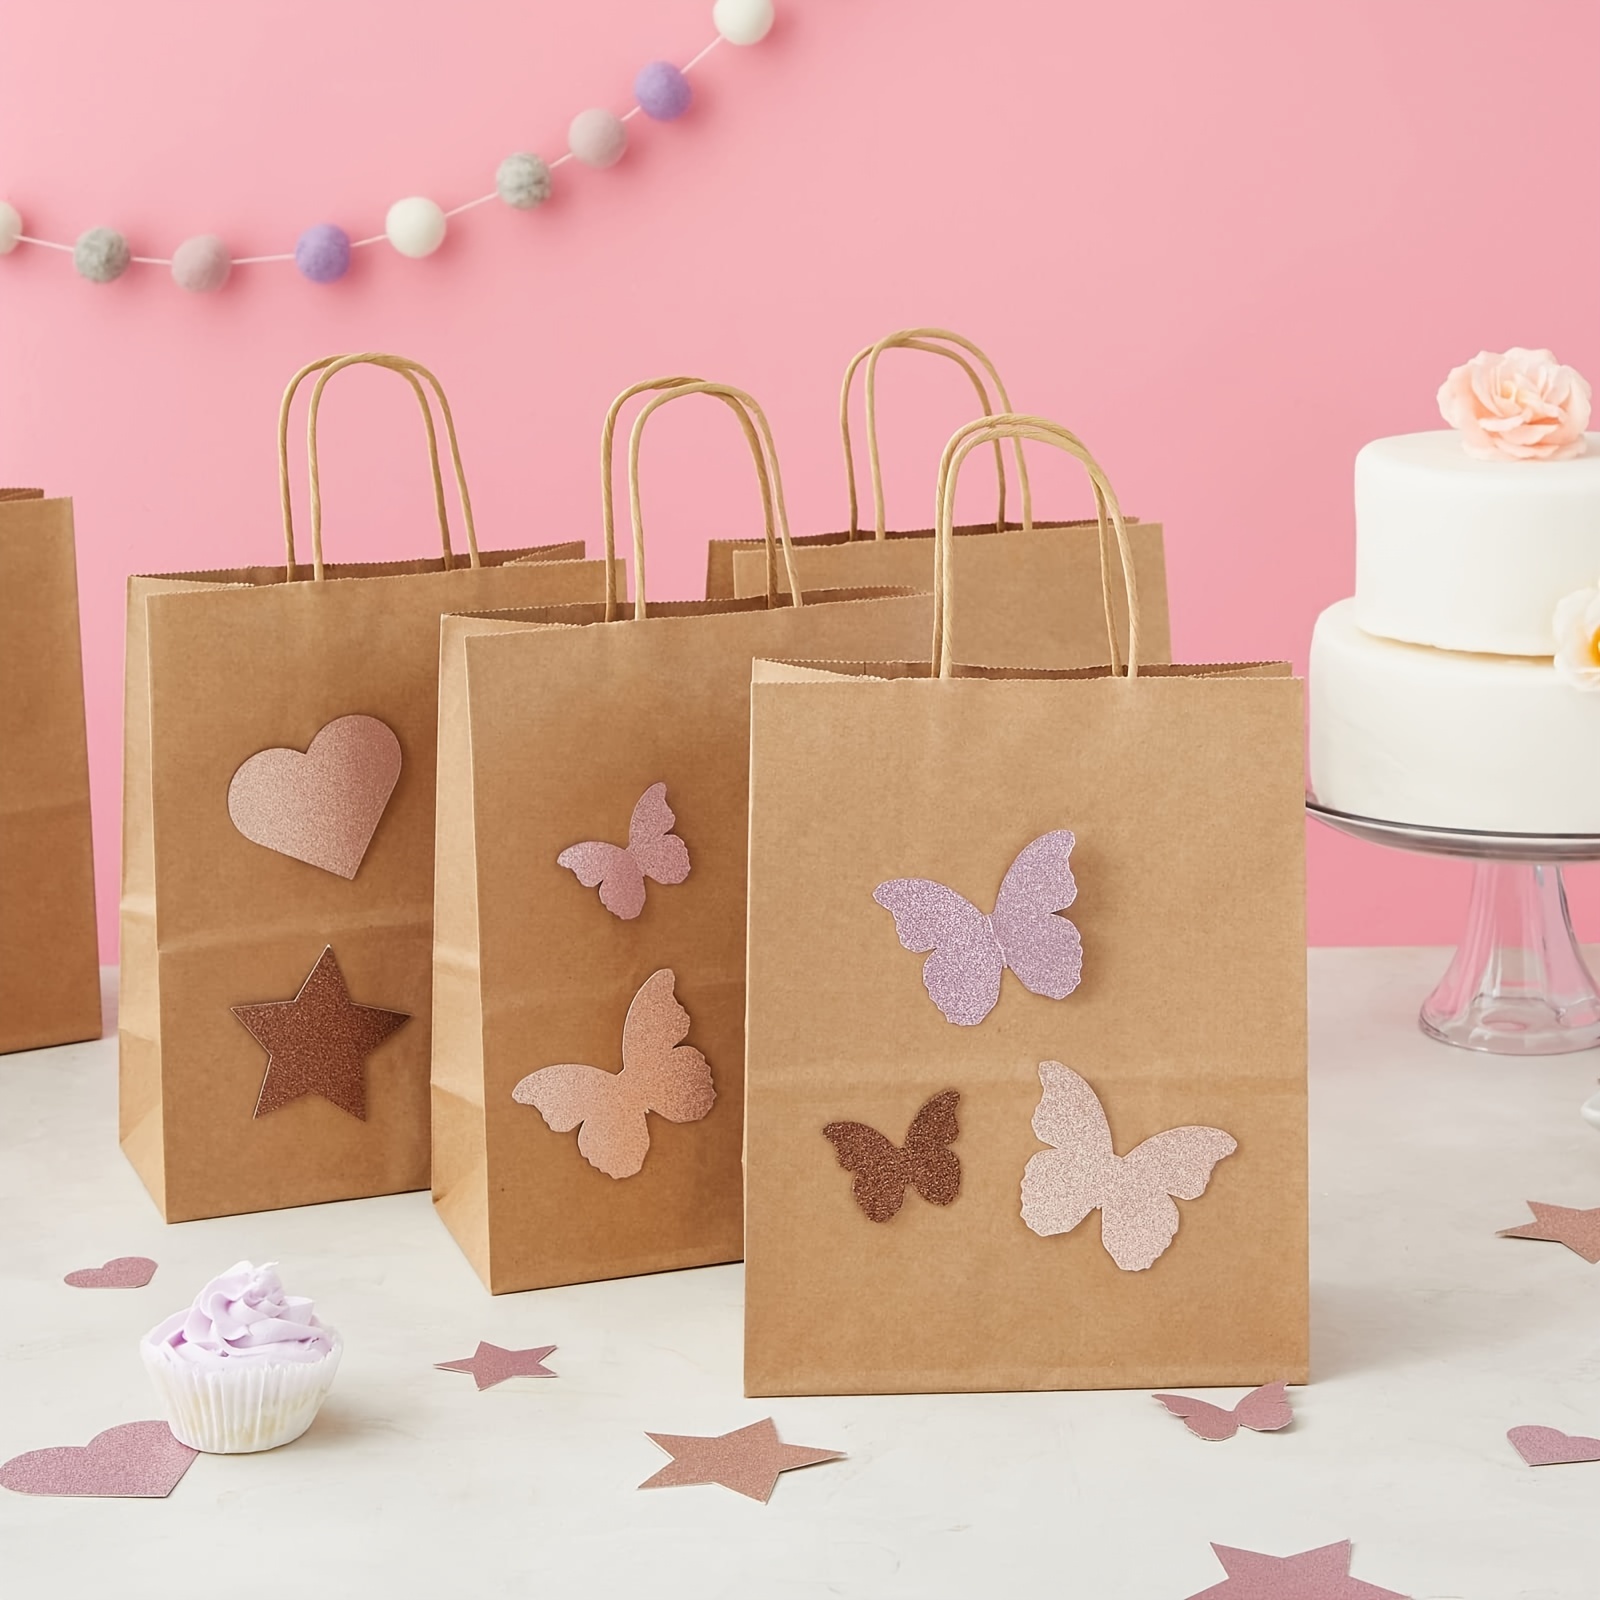 

30-pack Kraft Paper Gift Bags With Handles - 8.3x5.9x3.1" - Perfect For Party Favors, Mother's & Father's Day Goodies, Retail Shopping - Light Brown/black